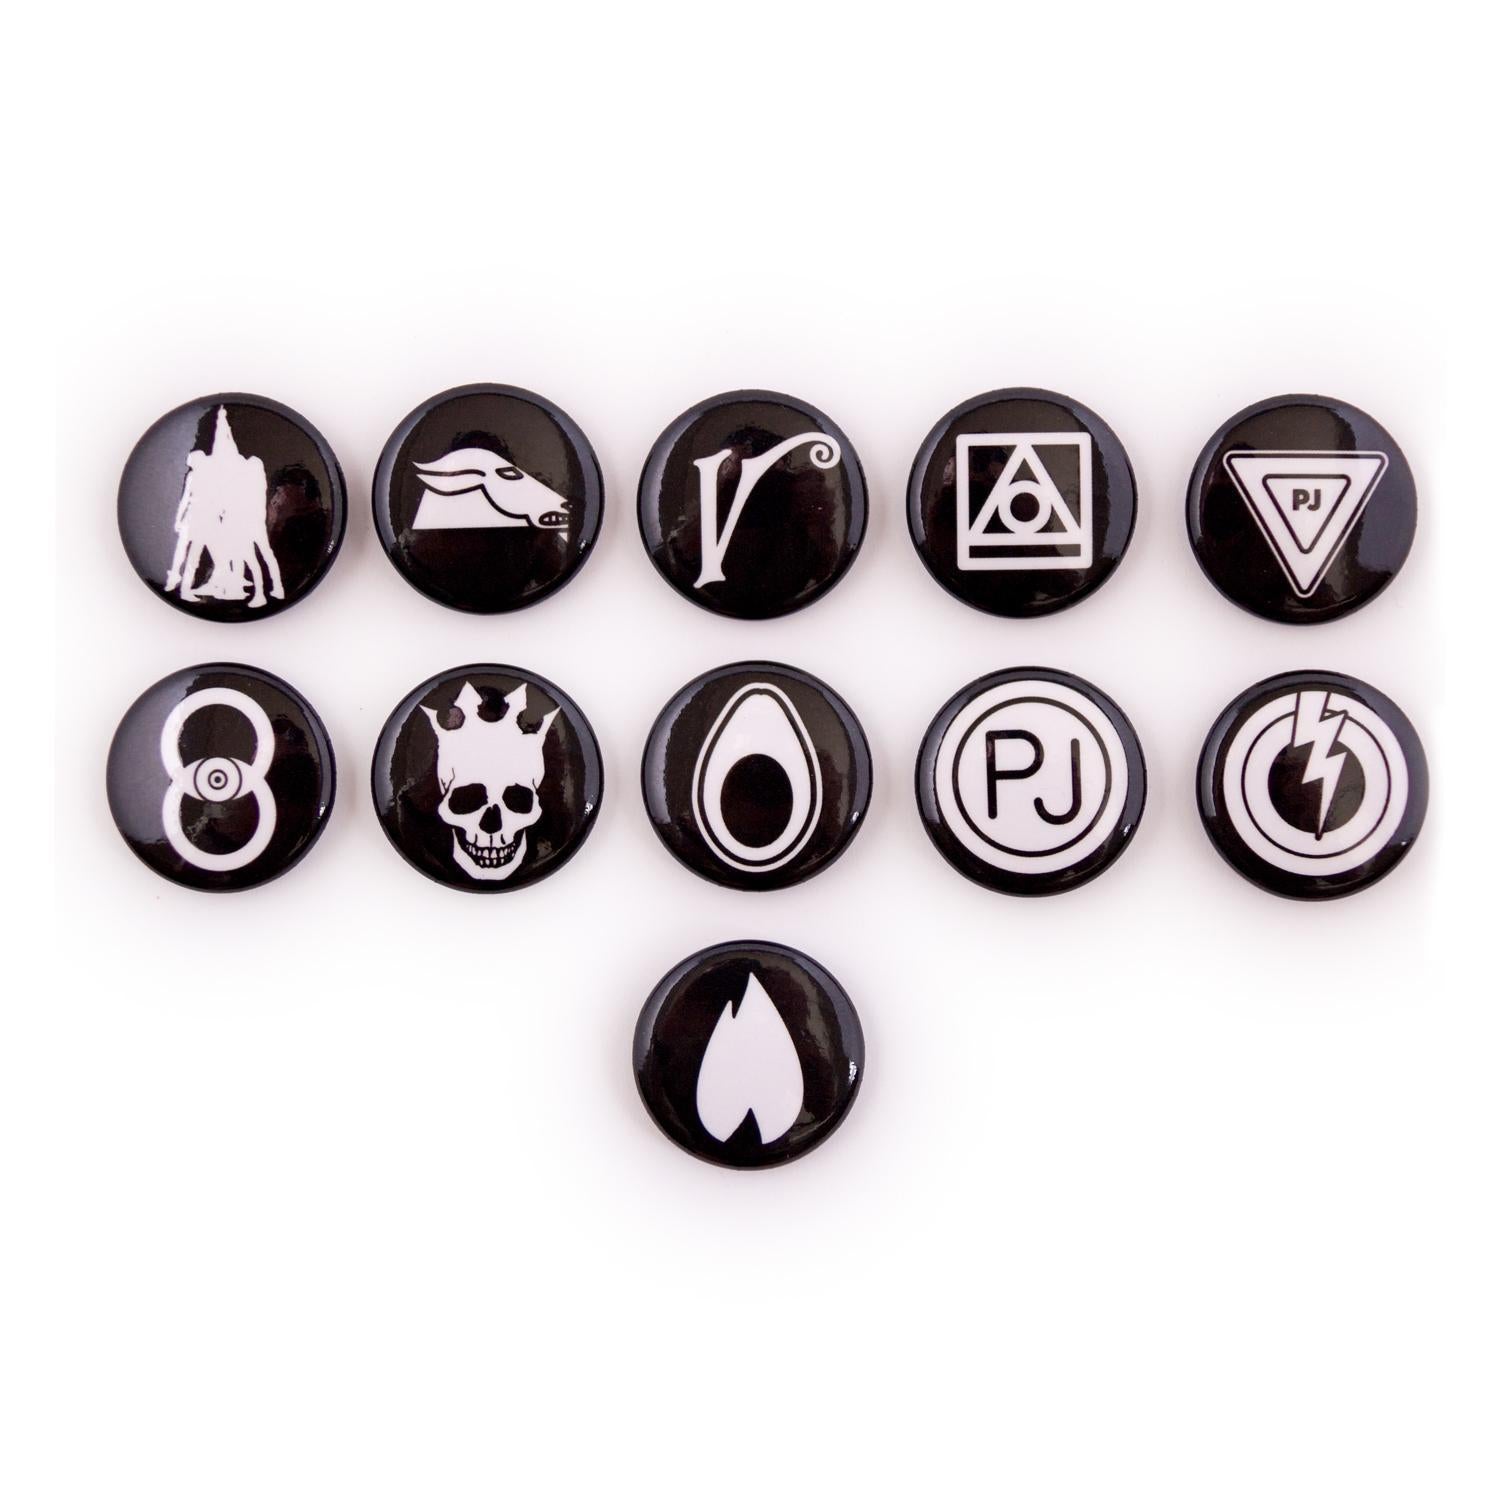 2021 PEARL JAM ICON BUTTONS